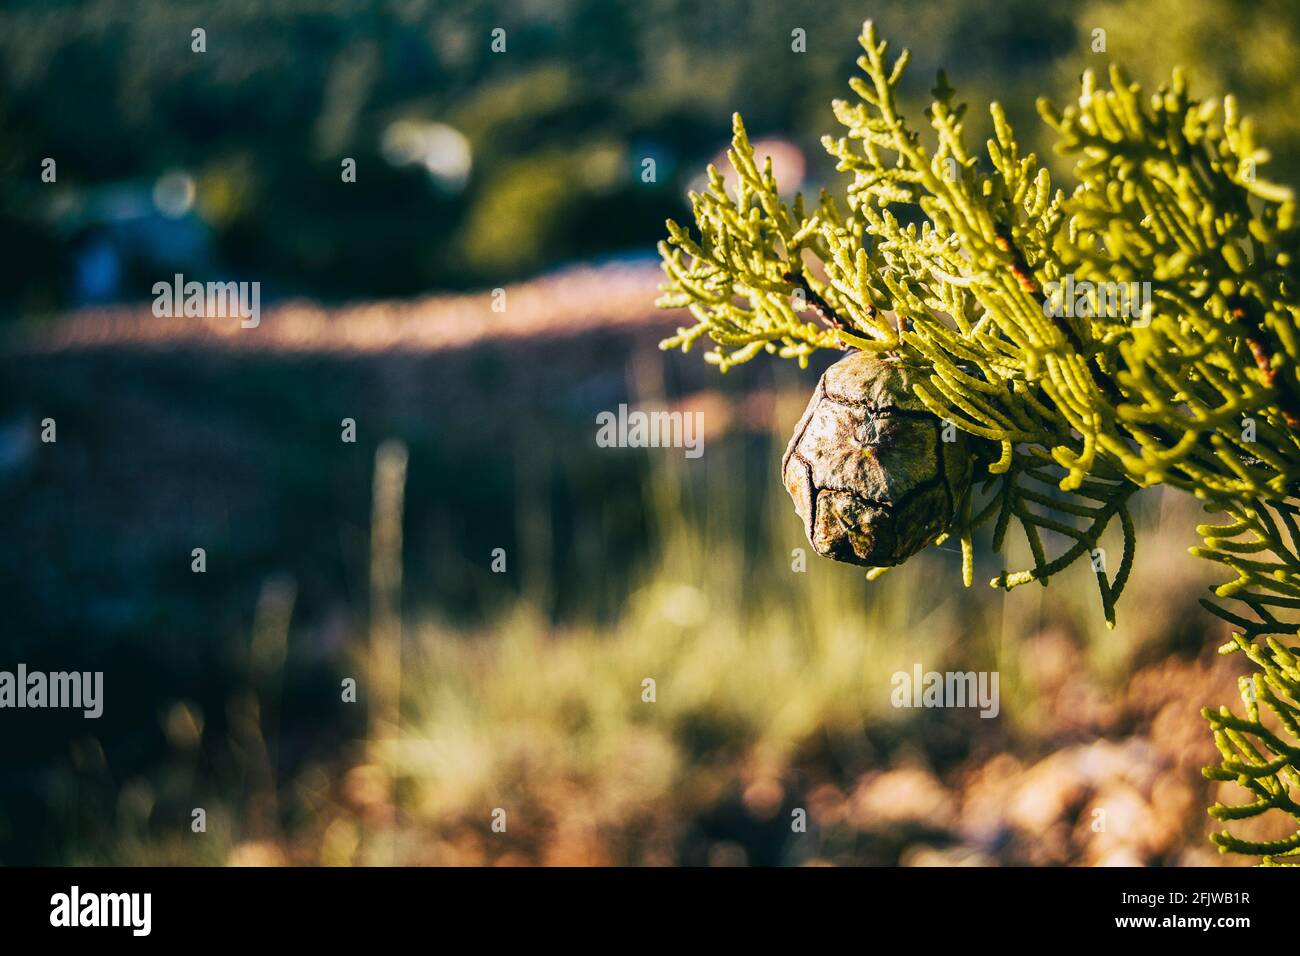 cone close up of cupressus in nature with unfocused background and space for text Stock Photo